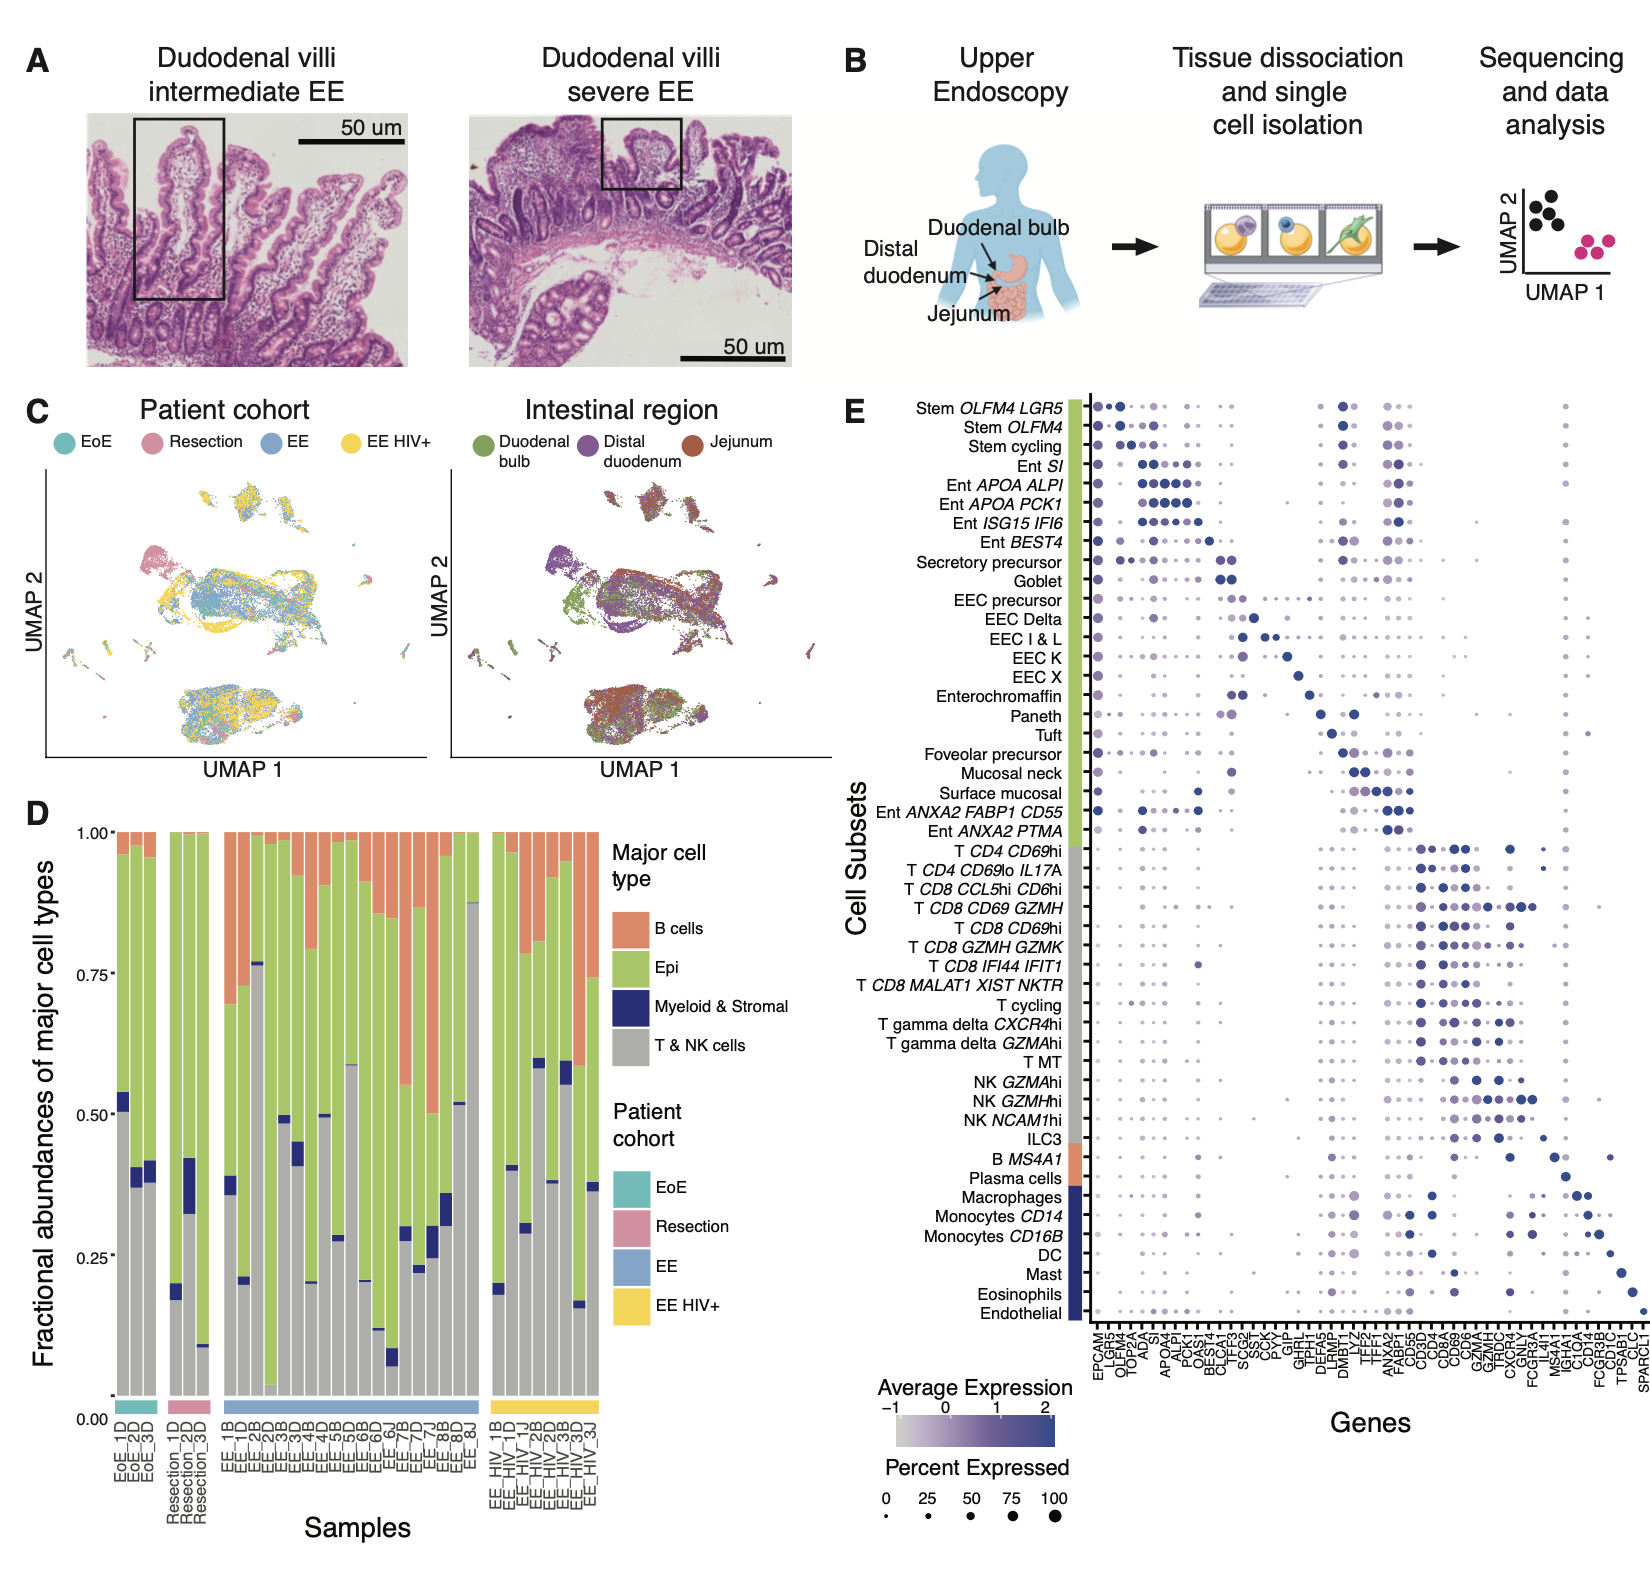 Single-cell profiling of environmental enteropathy reveals signatures of epithelial remodeling and immune activation in severe disease